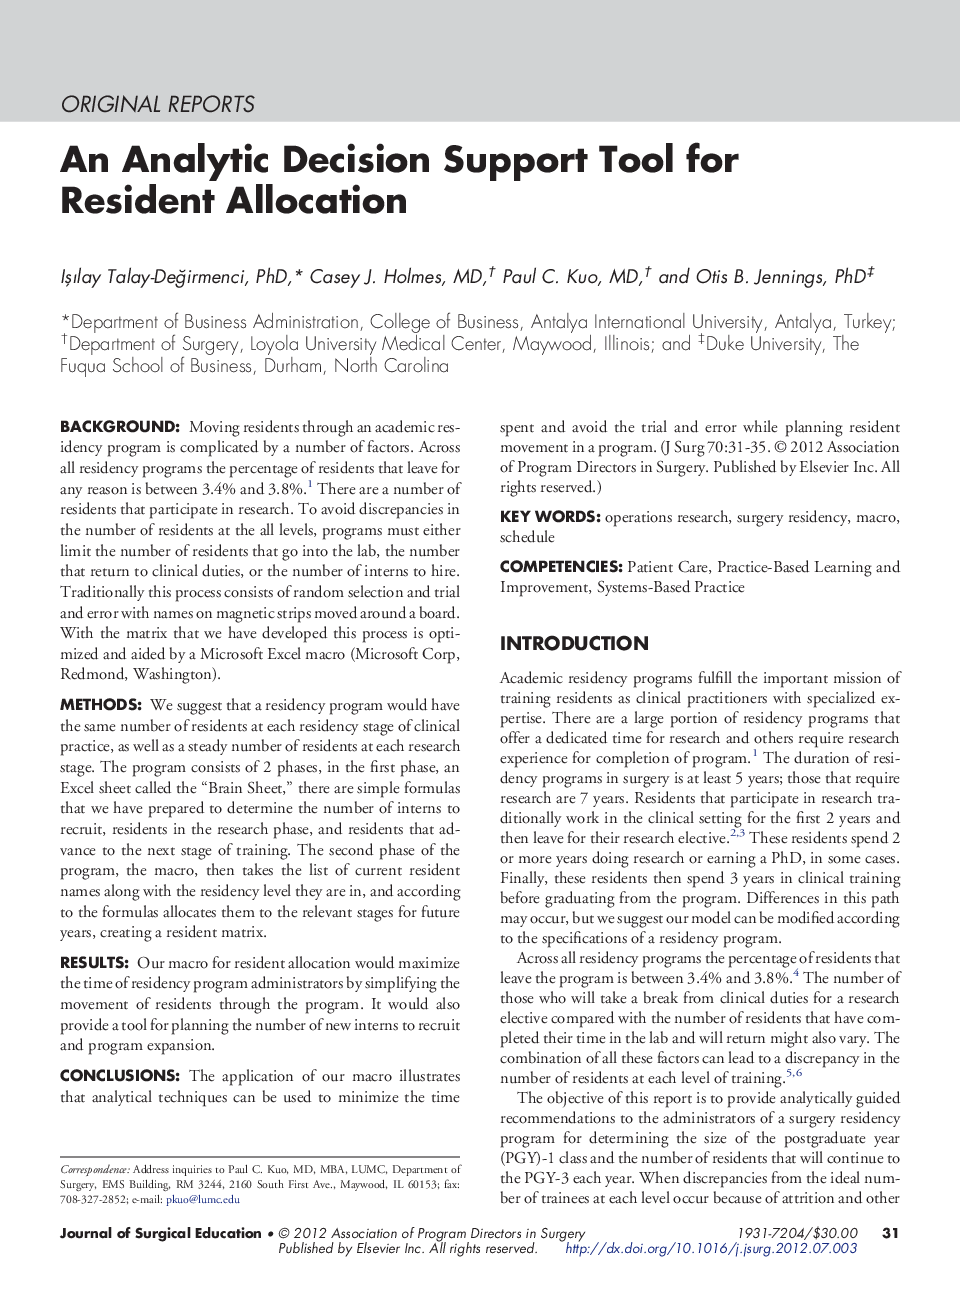 An Analytic Decision Support Tool for Resident Allocation